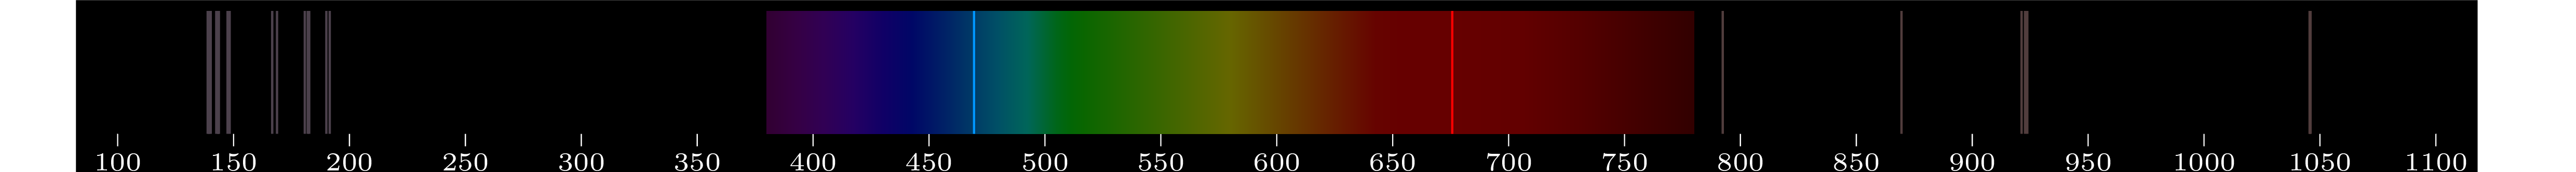 emmision spectra of element S